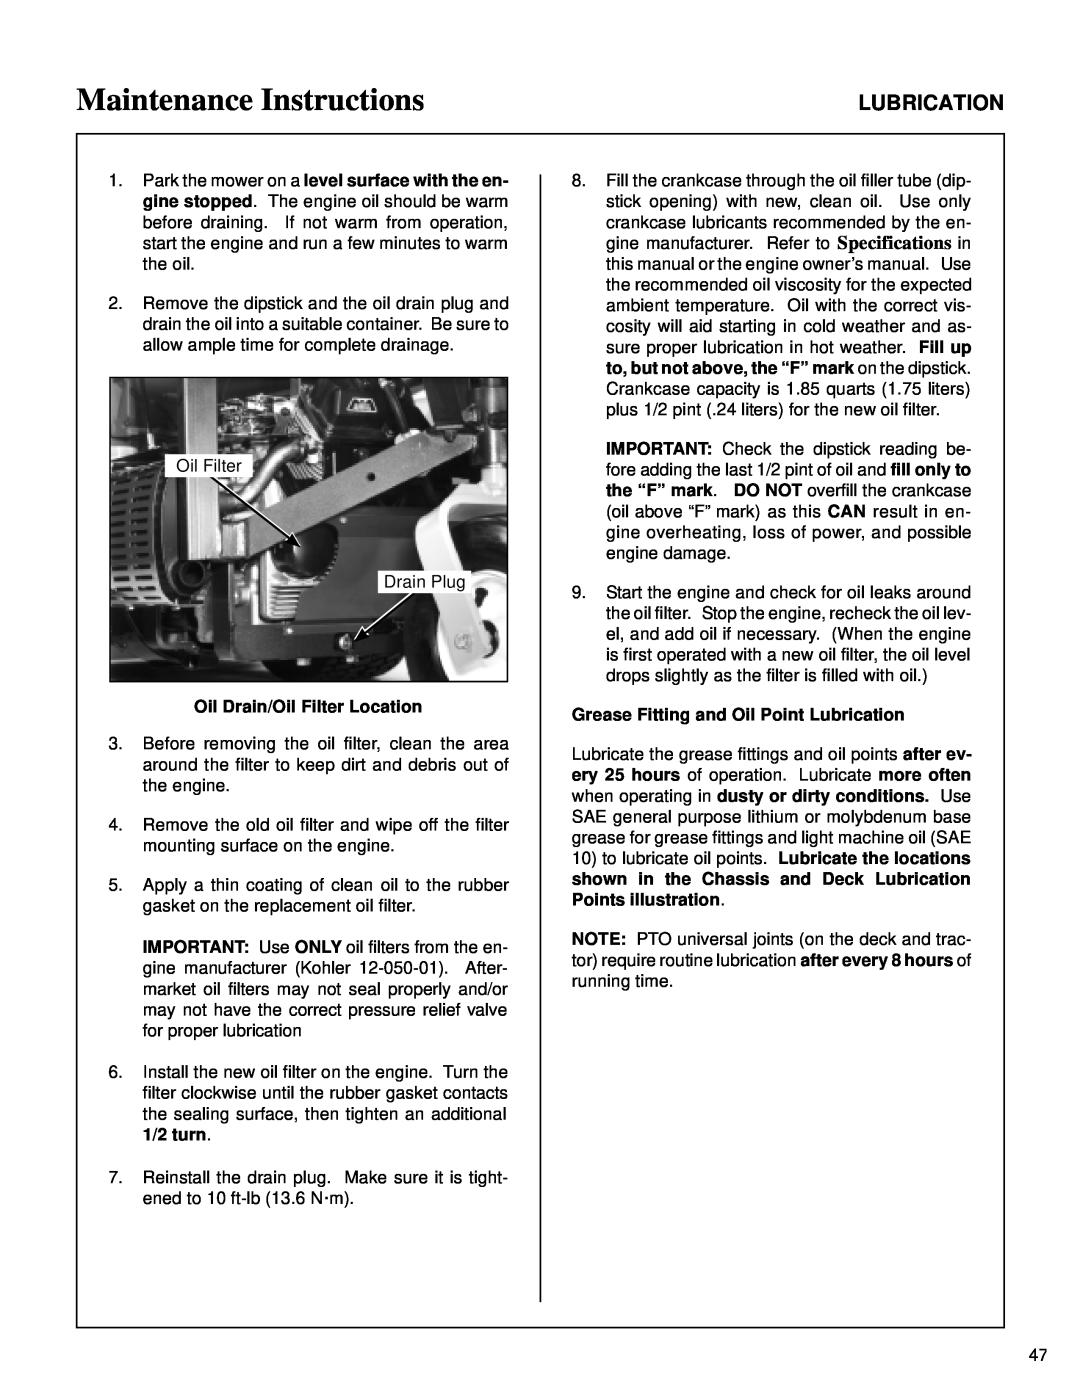 Walker MT Maintenance Instructions, Oil Drain/Oil Filter Location, Grease Fitting and Oil Point Lubrication 